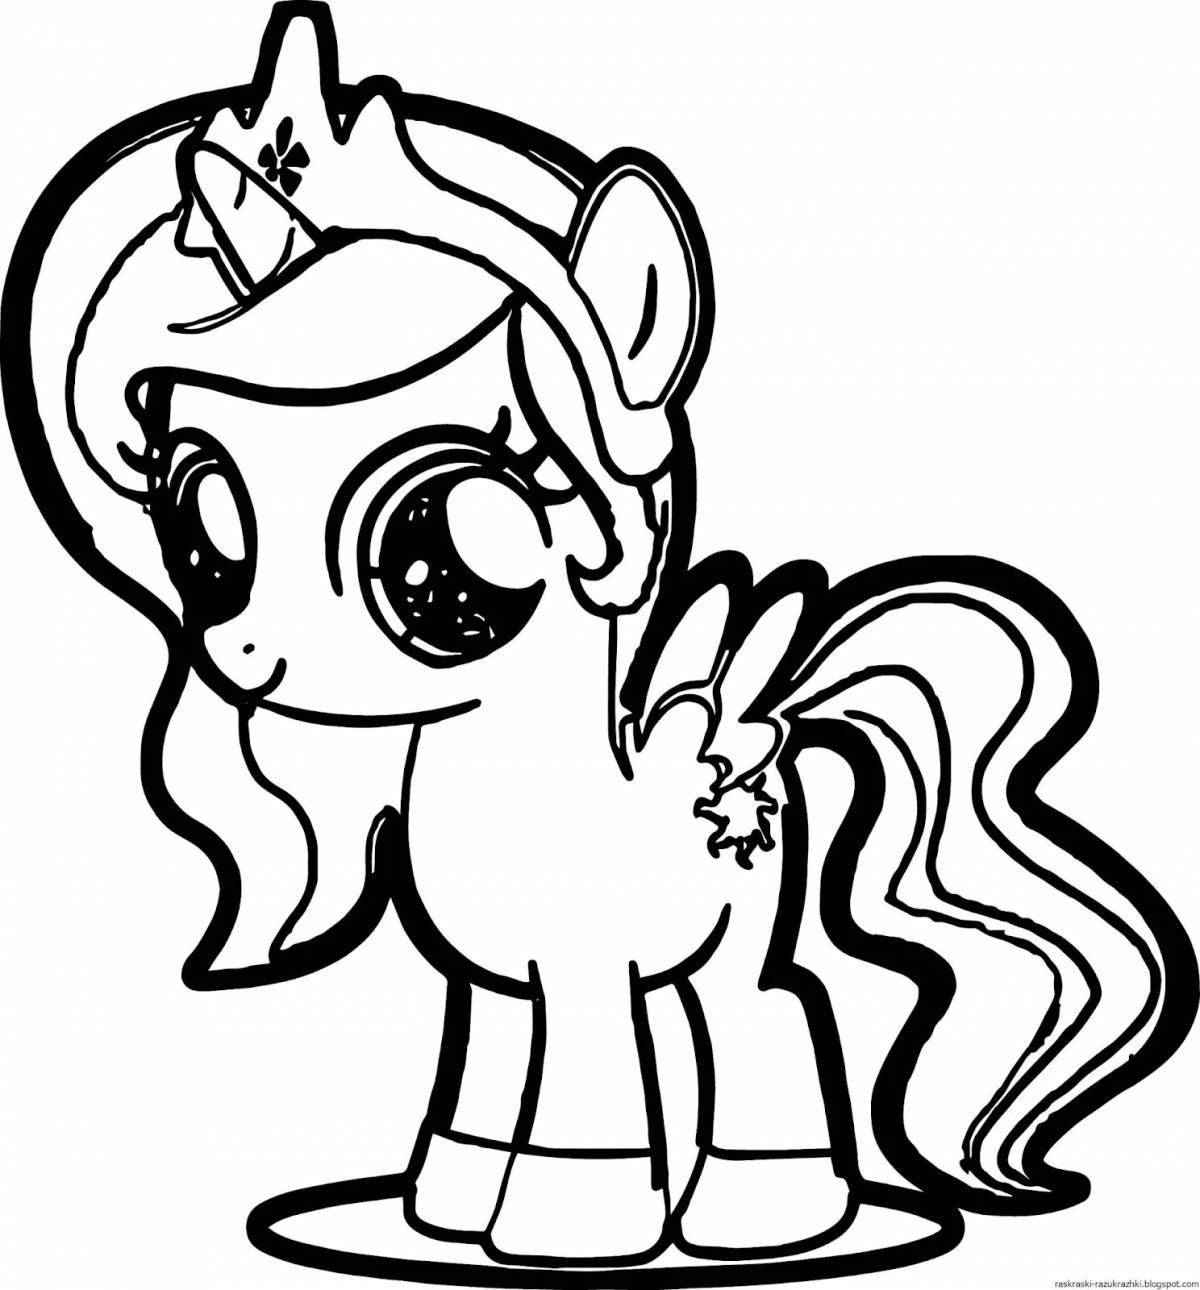 Adorable pony coloring book